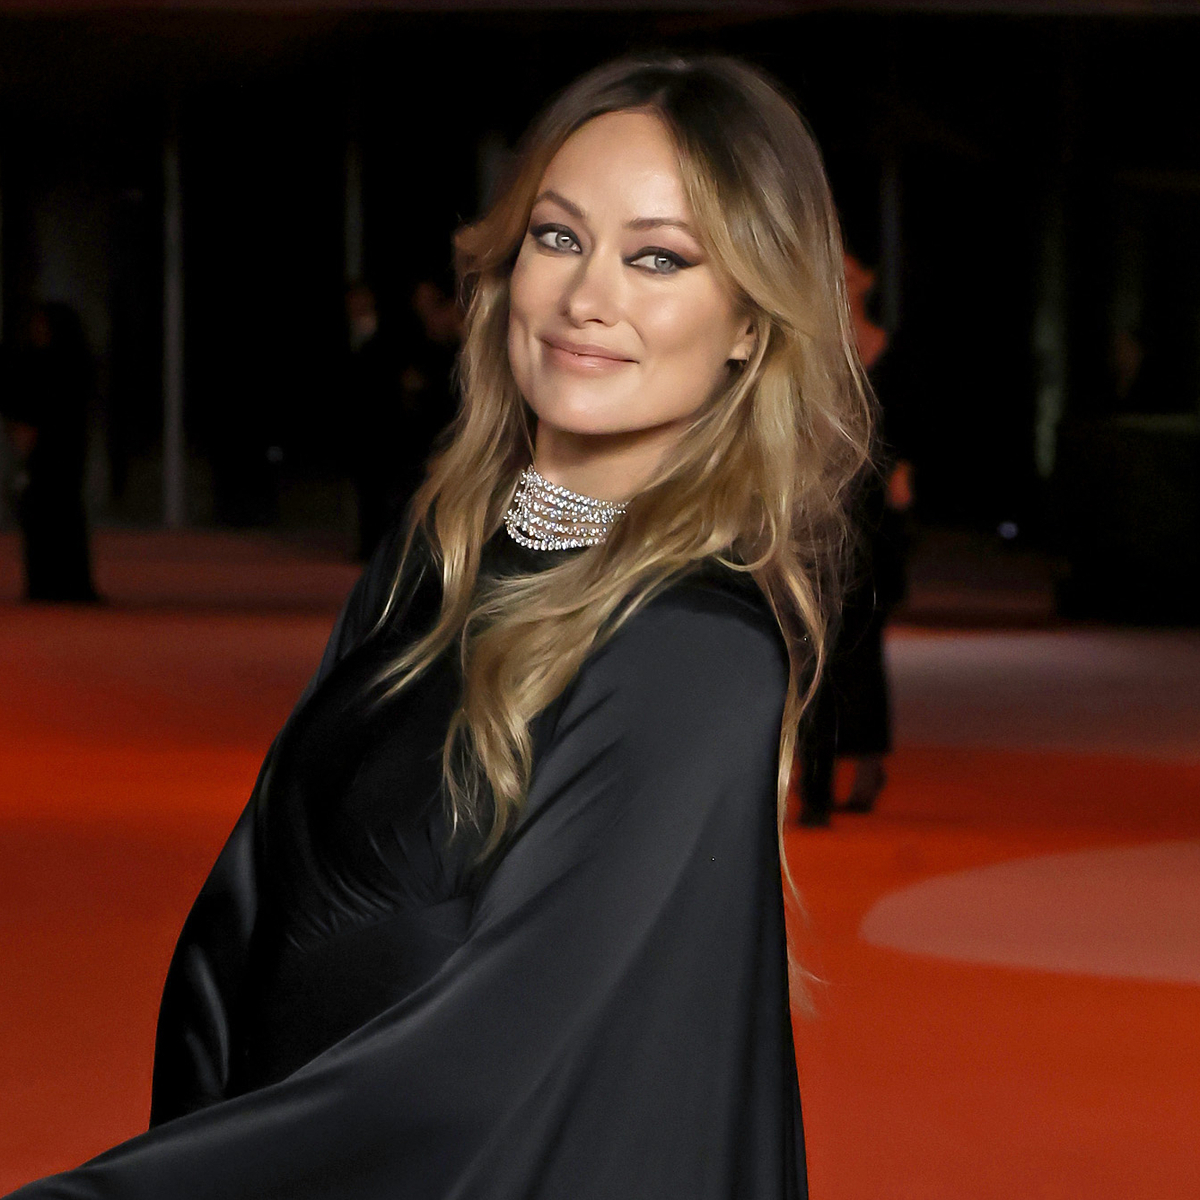 Olivia Wilde News, Pictures, and Videos - E! Online